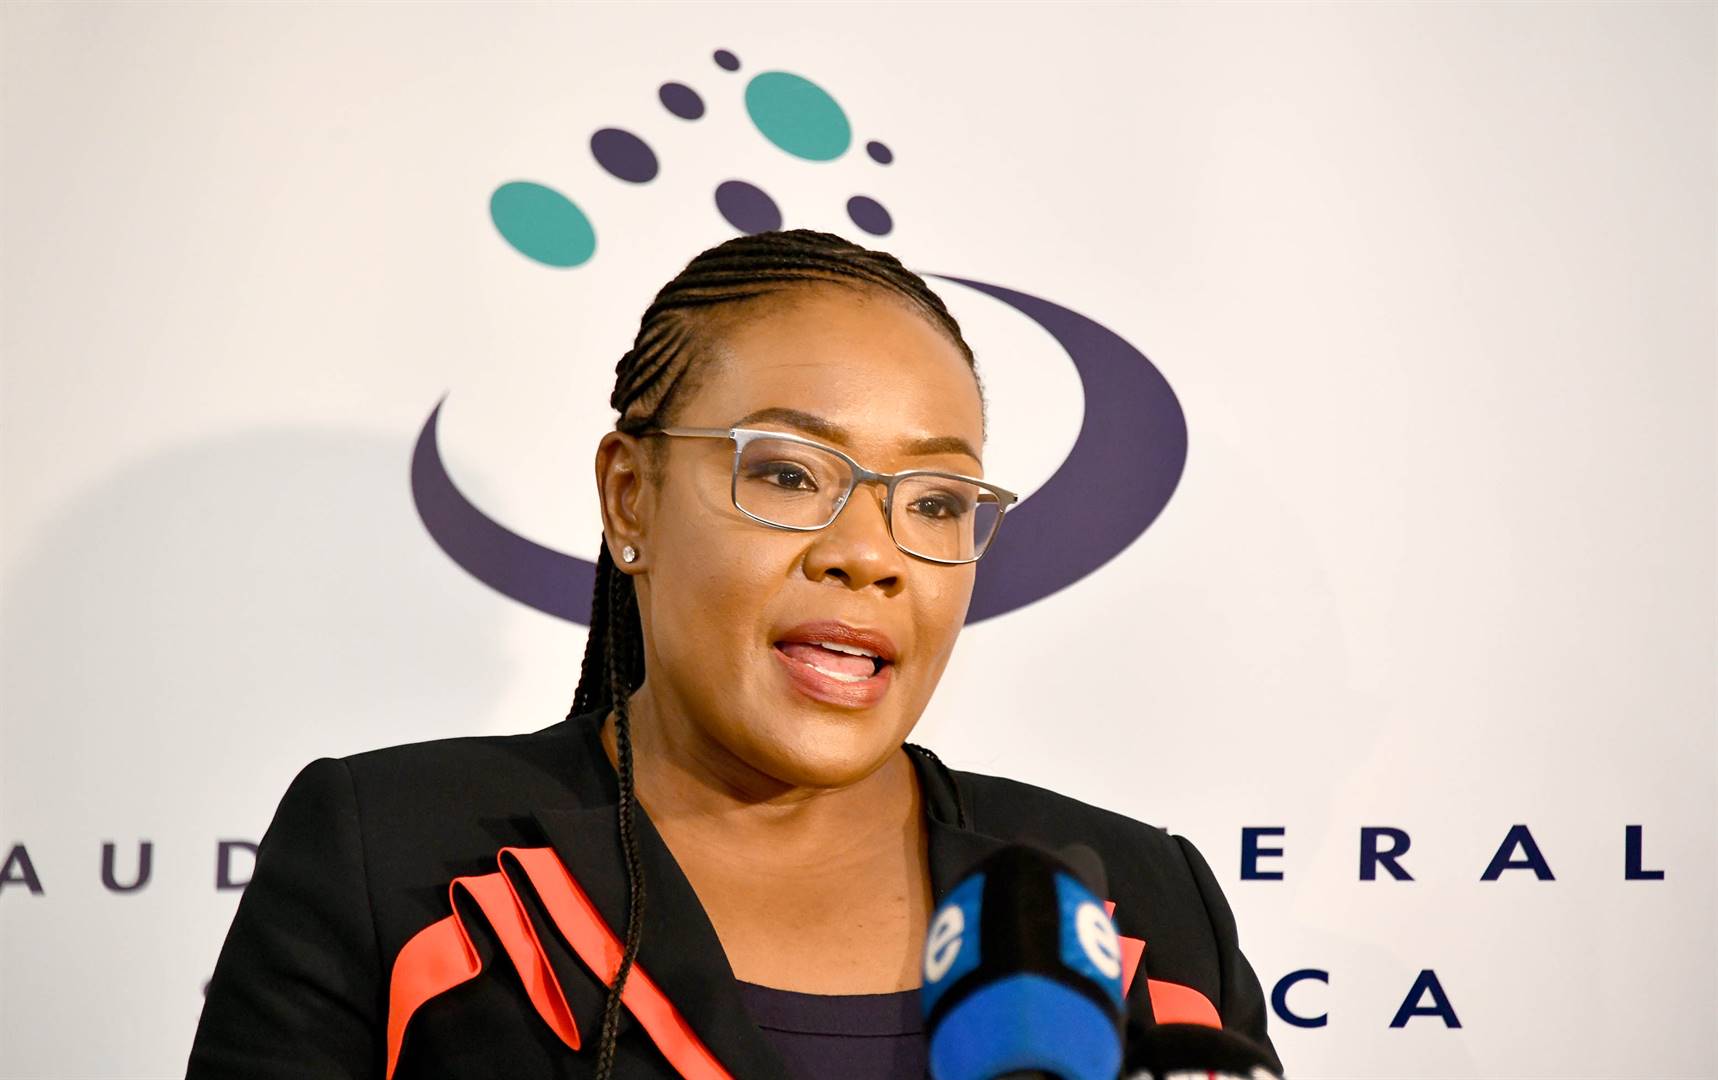 The 2022/23 financial year saw the most significant improvement in audit outcomes over the four-year period, according to Auditor-General Tsakani Maluleke